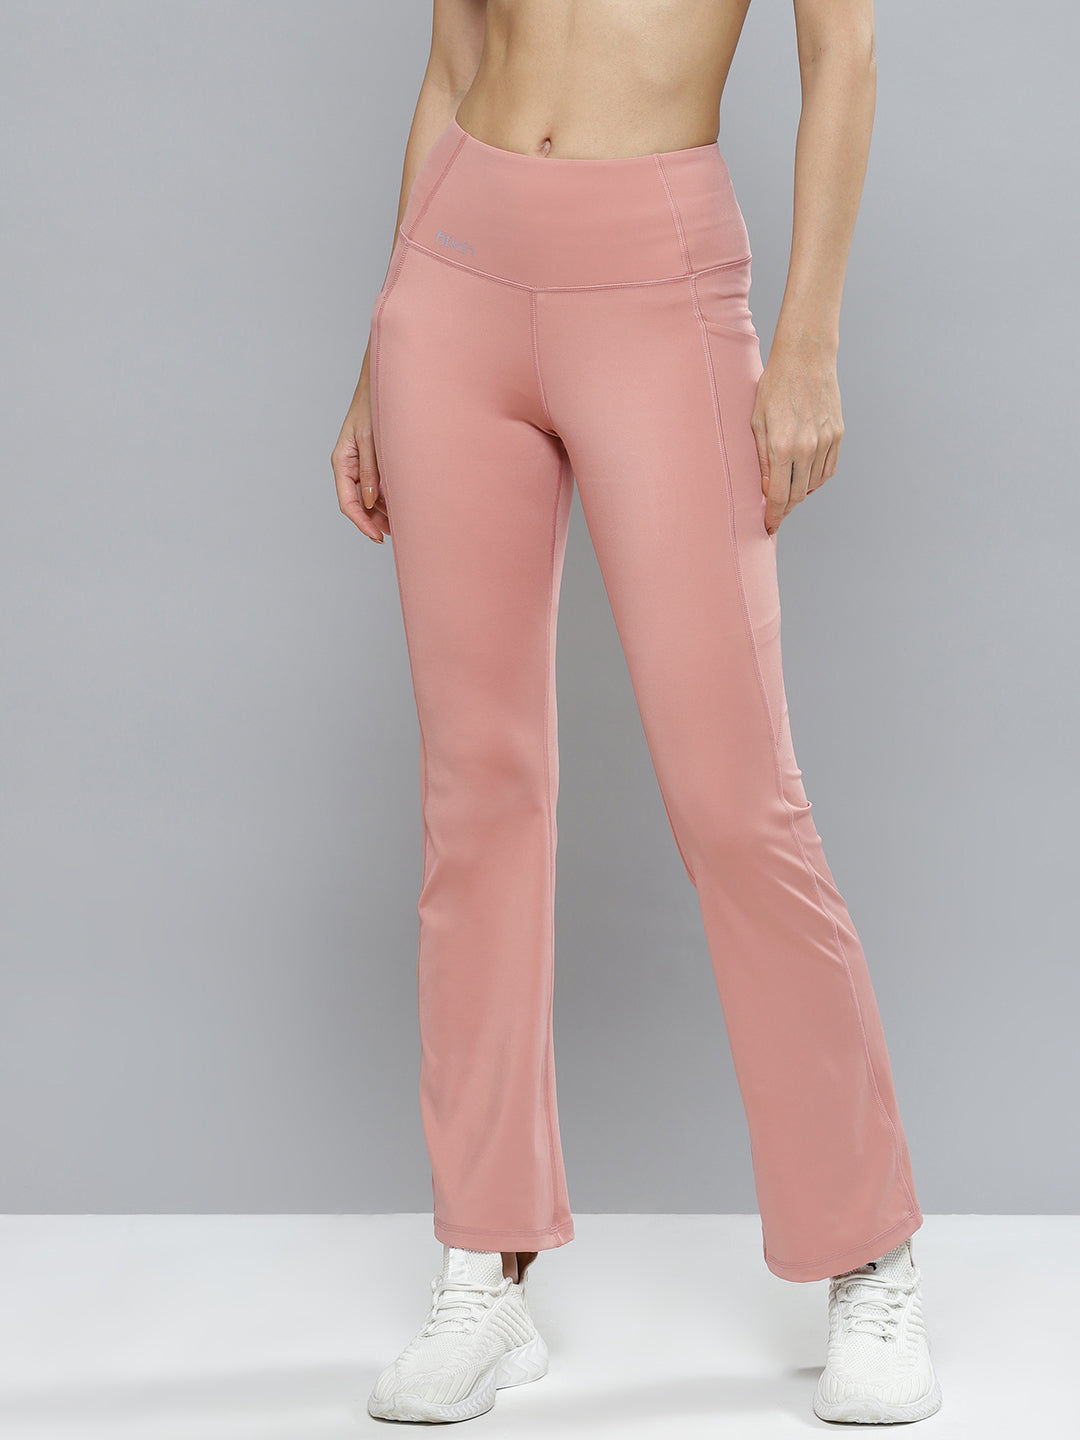 Women's Dusty Pink Solid Dry Fit Bootcut Gym Track Pants – Fitkin